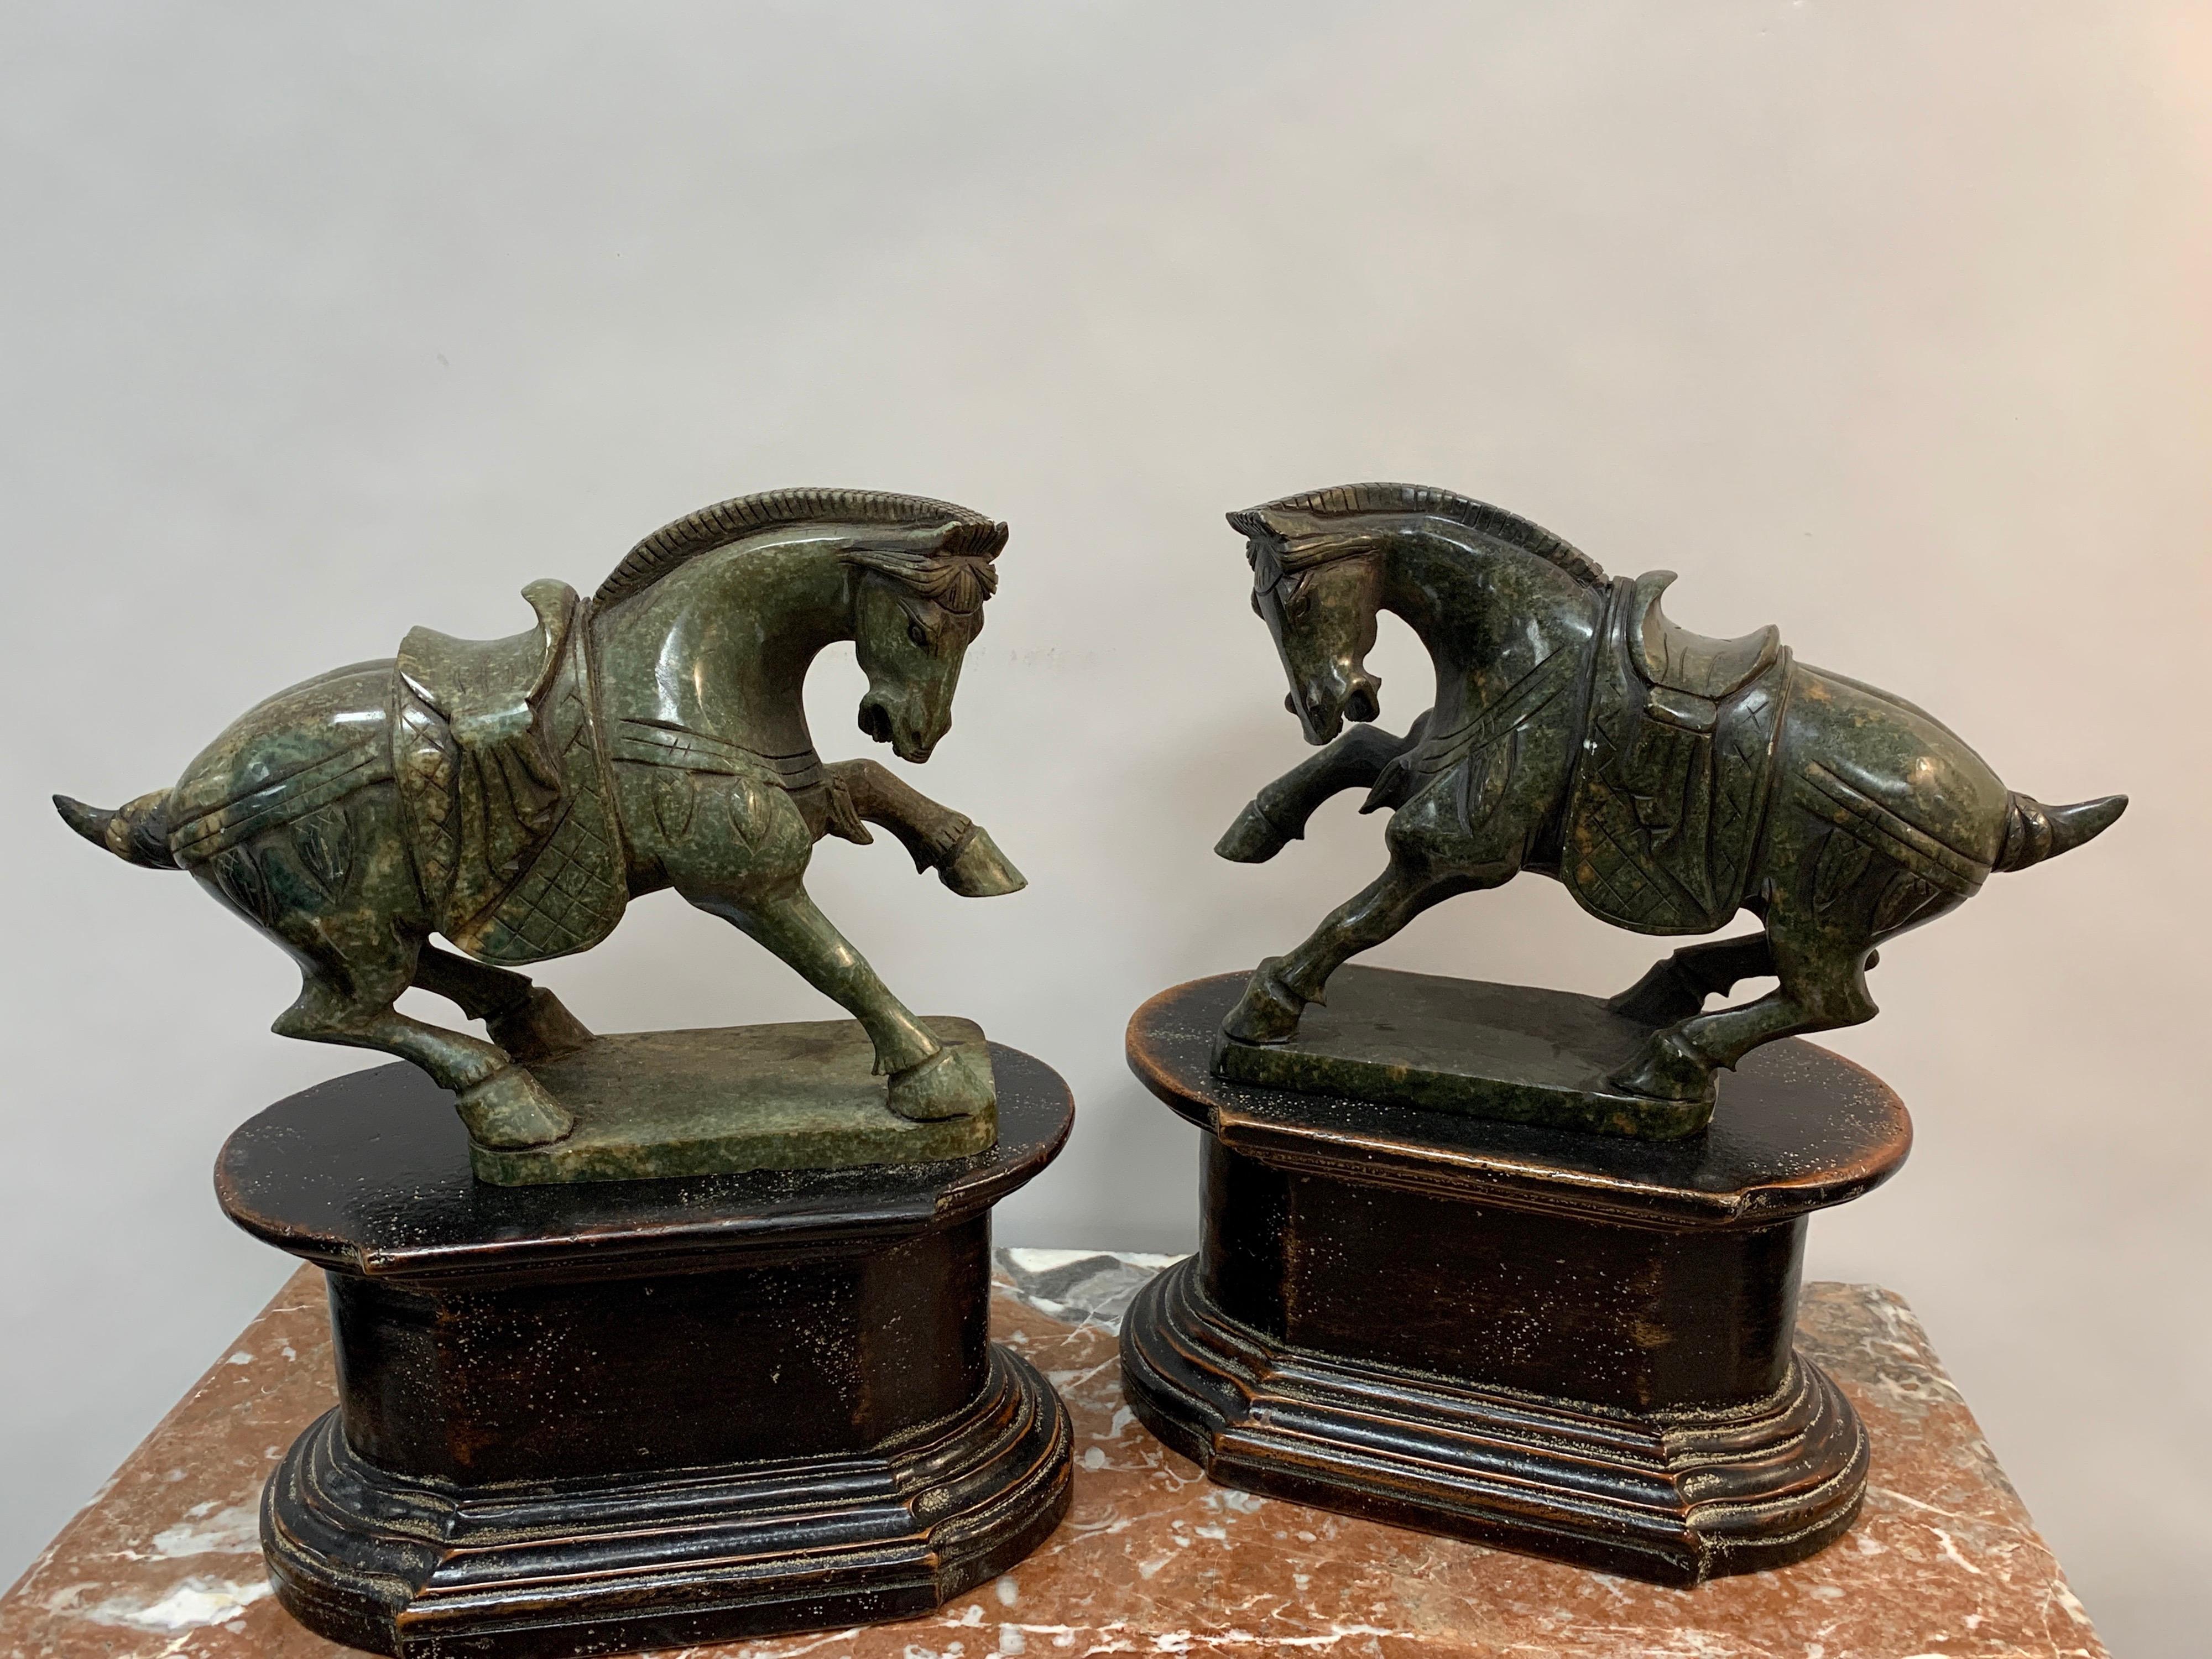 Pair of Chinese export hardstone horses and stands, each one finely carved of a standing horse with one leg up, facing left and right. Removable from the associated lacquered stands. Unmarked
Two horses alone measure approximately 10